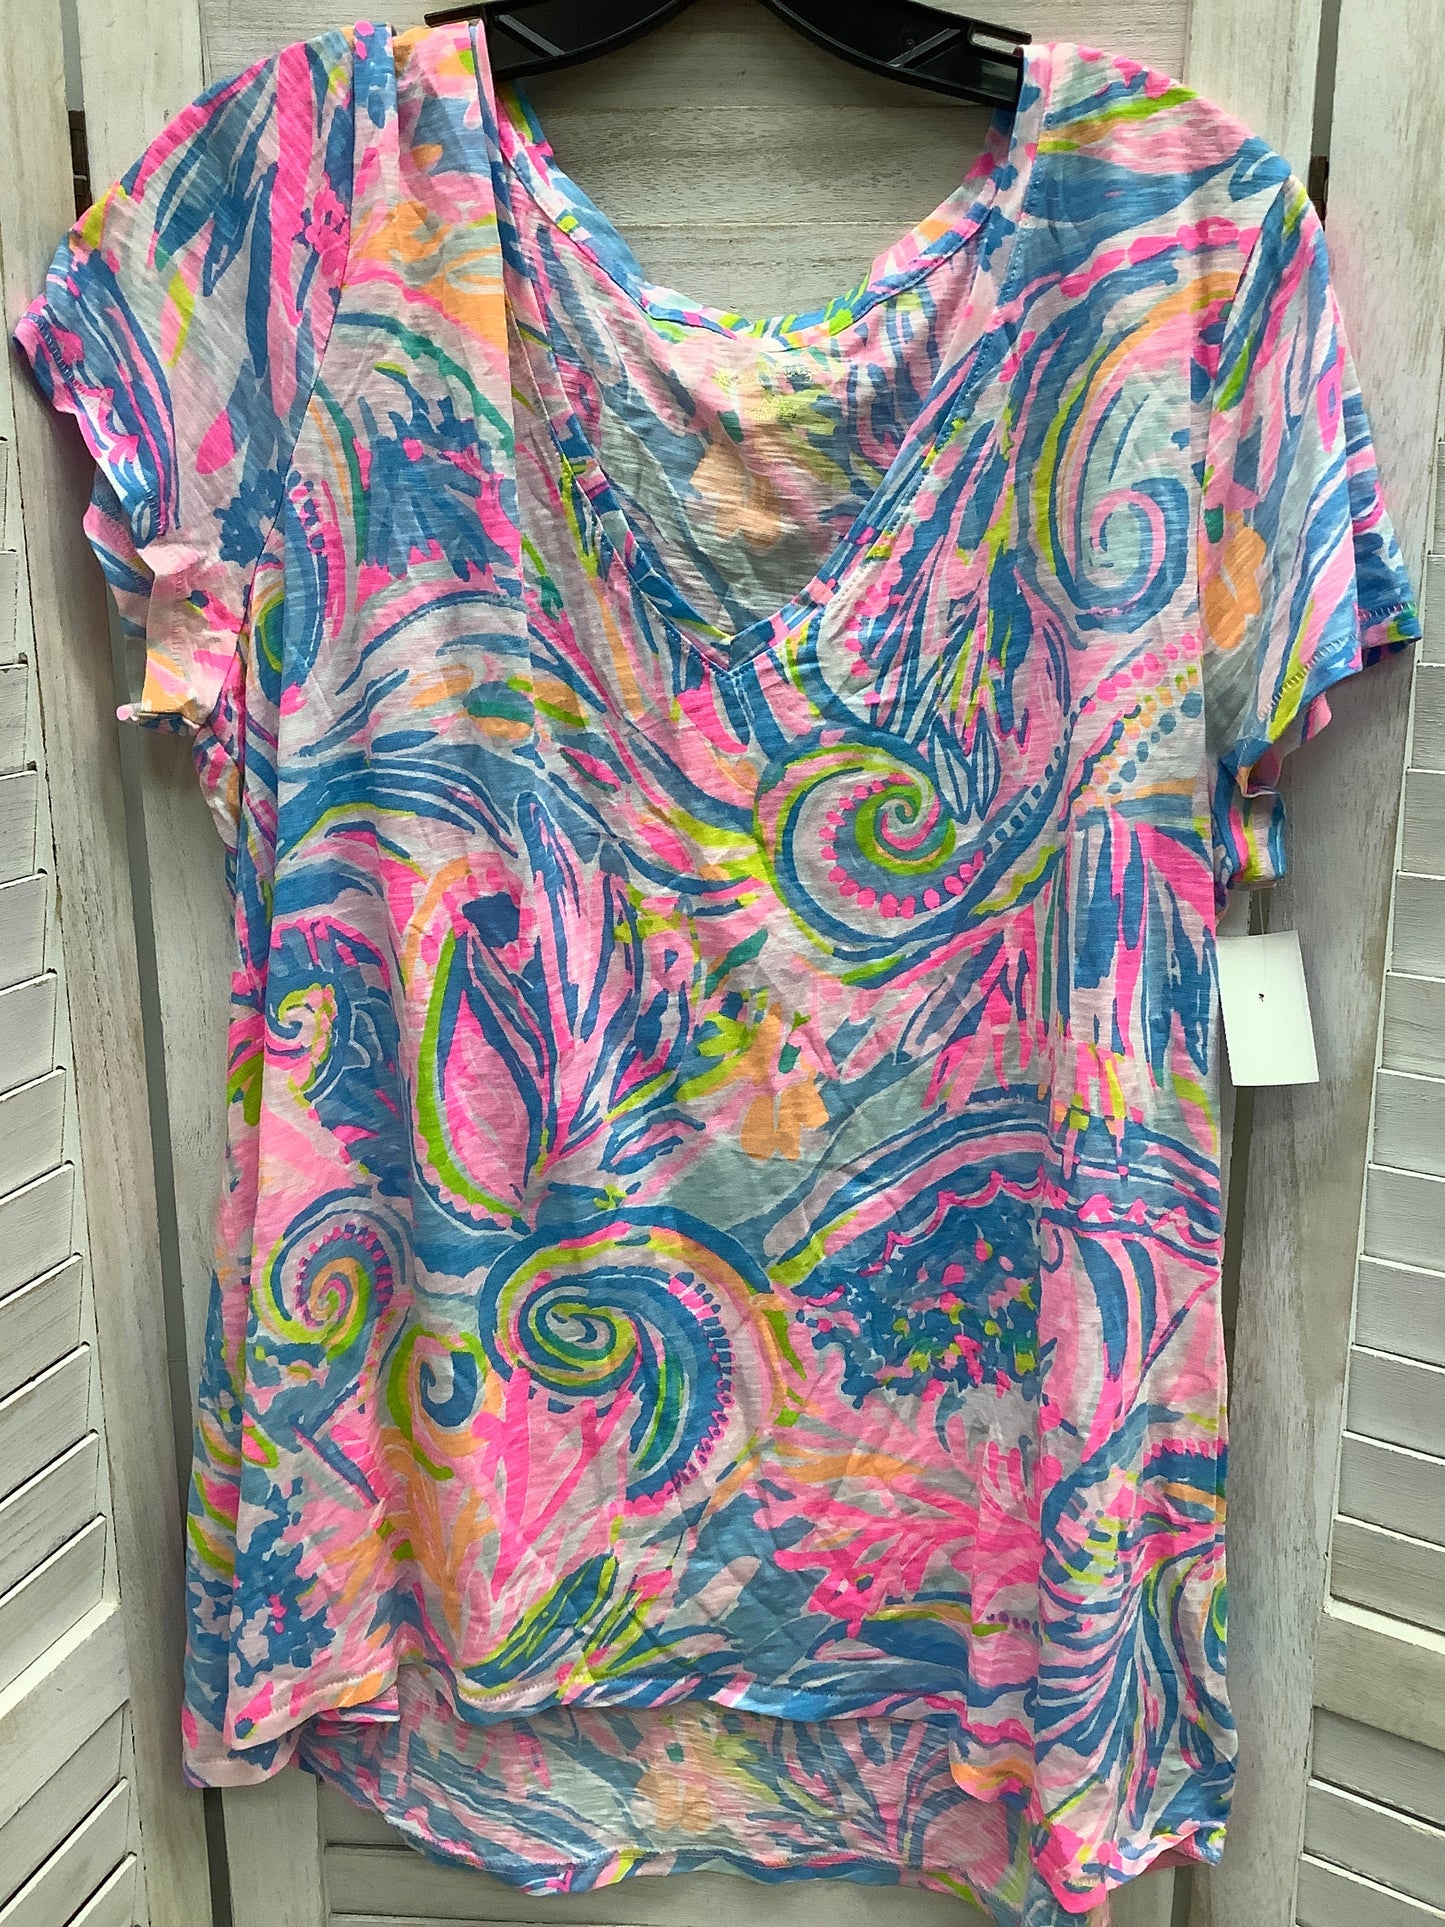 Multi-colored Top Short Sleeve Lilly Pulitzer, Size 2x